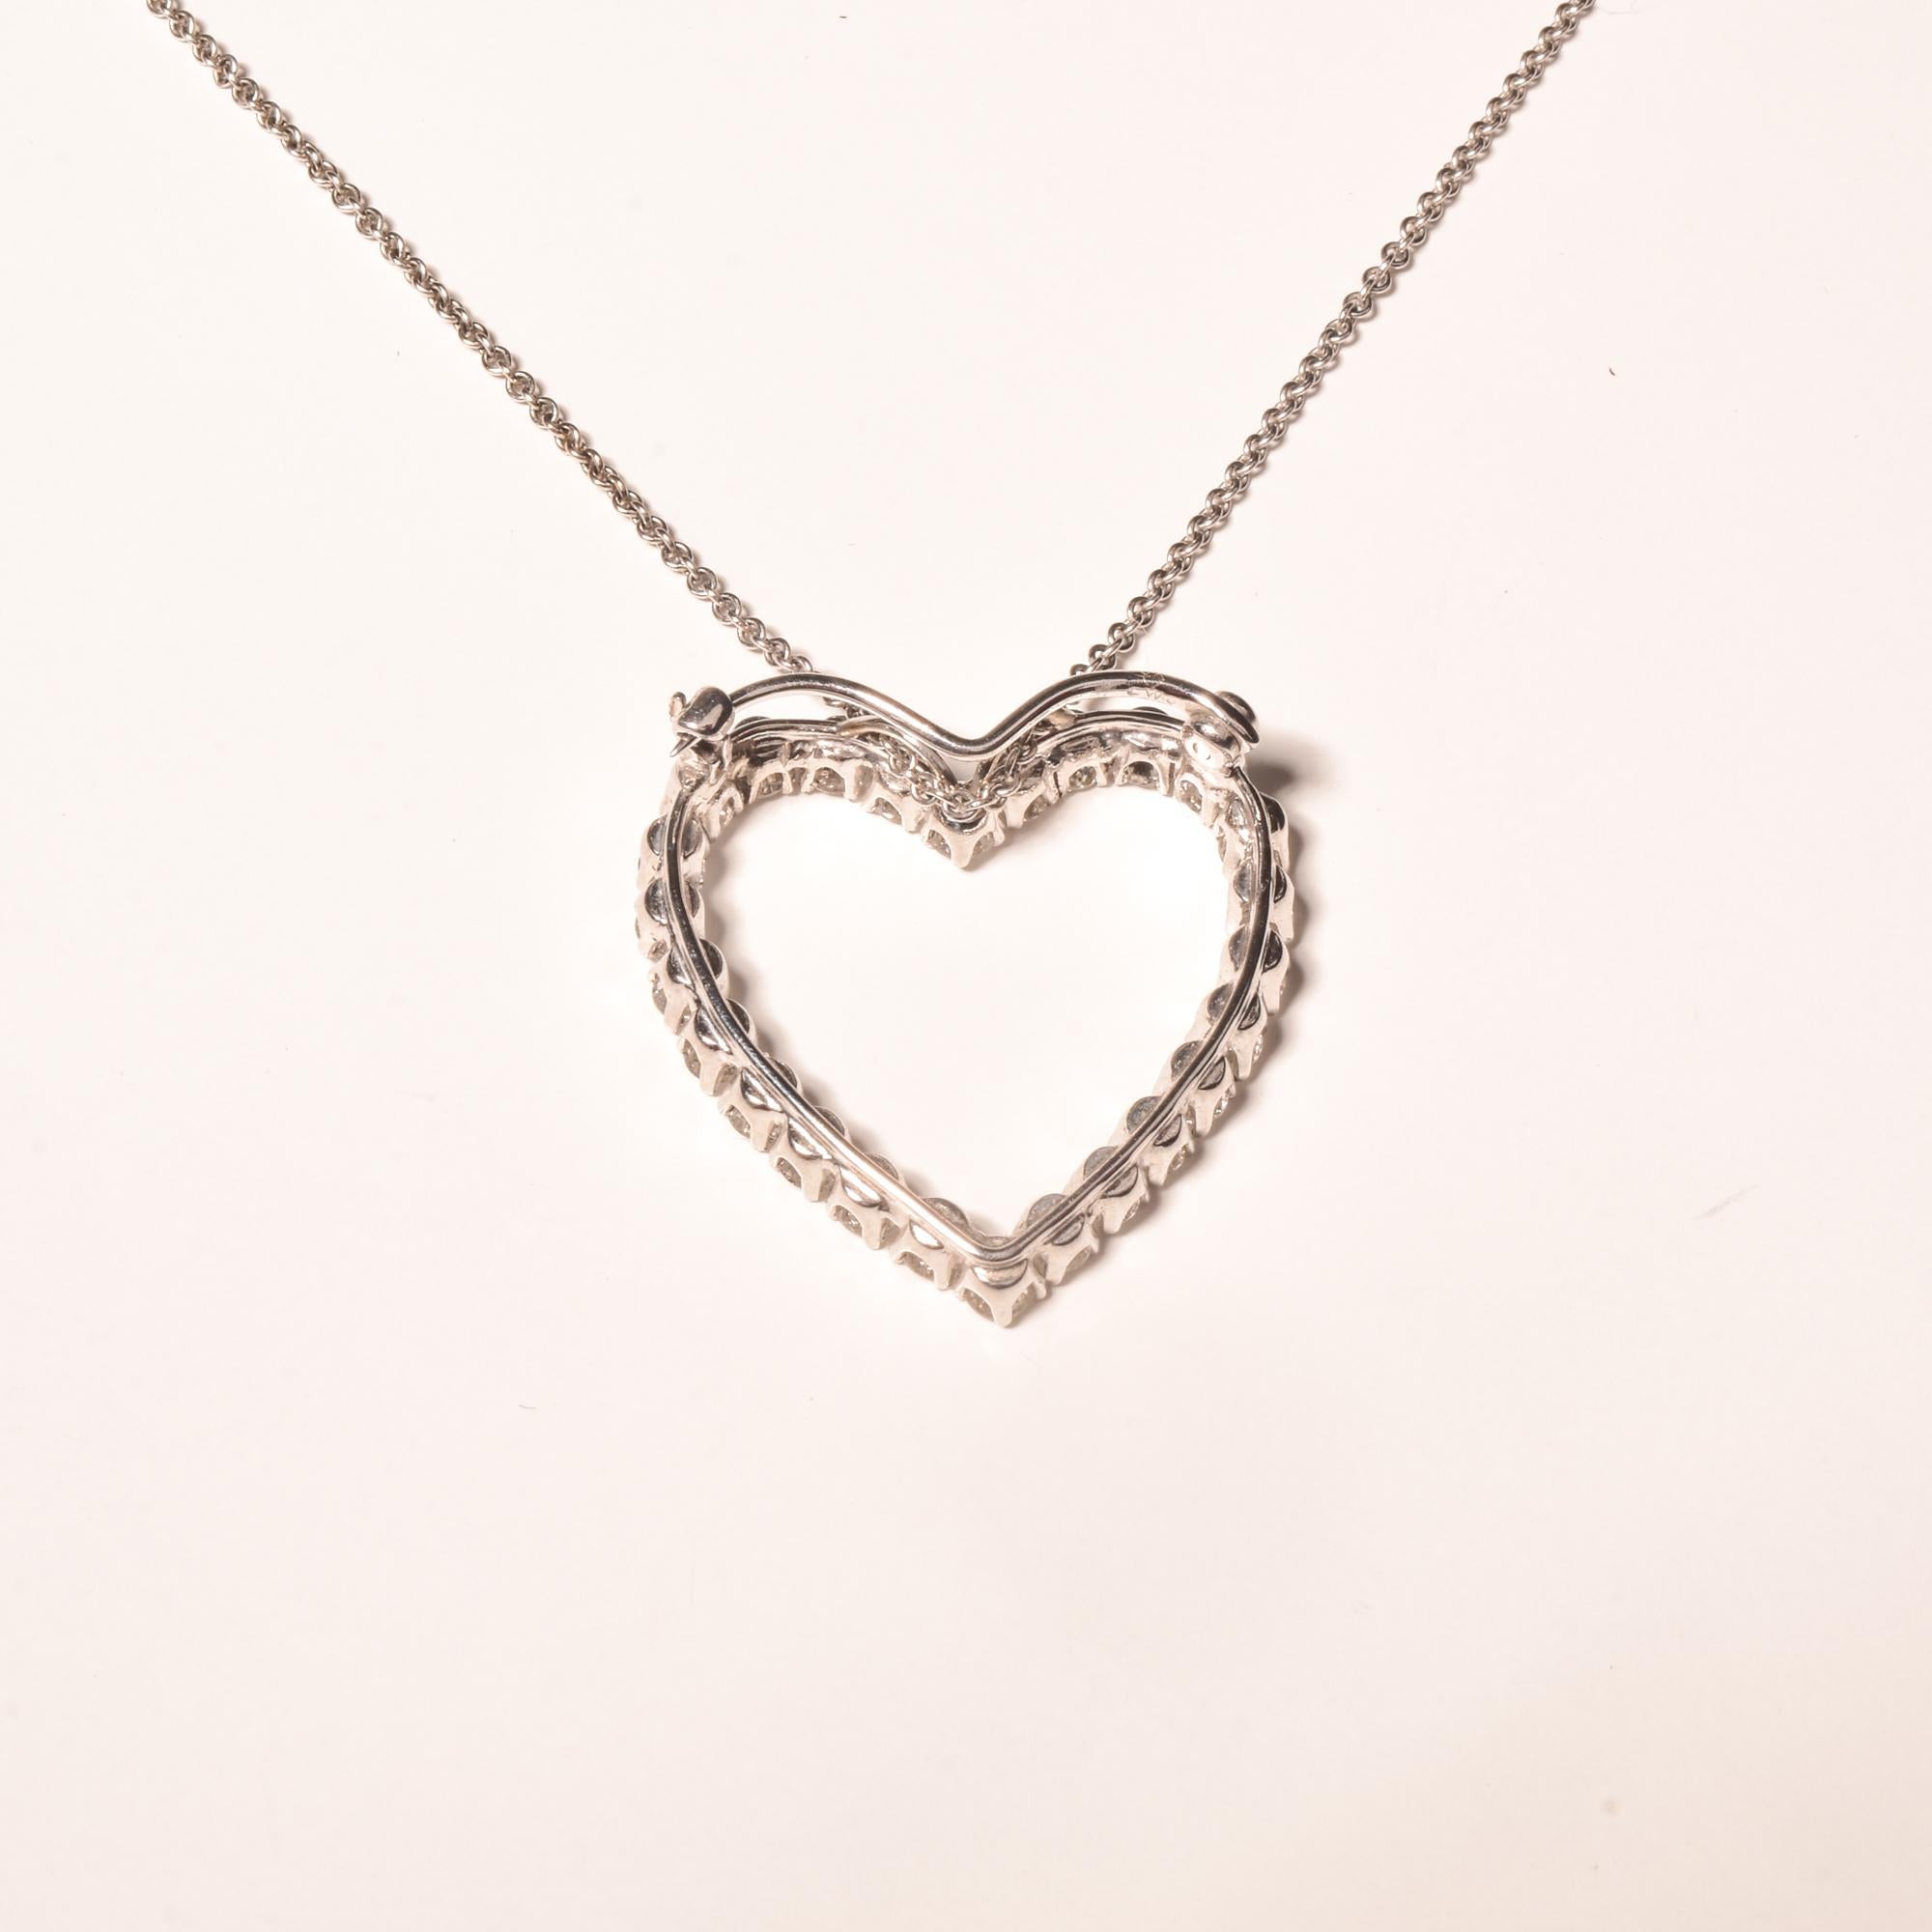 Natural Diamond Heart Pendant Necklace in 14k White Gold, 2.6 TCW For Sale 3